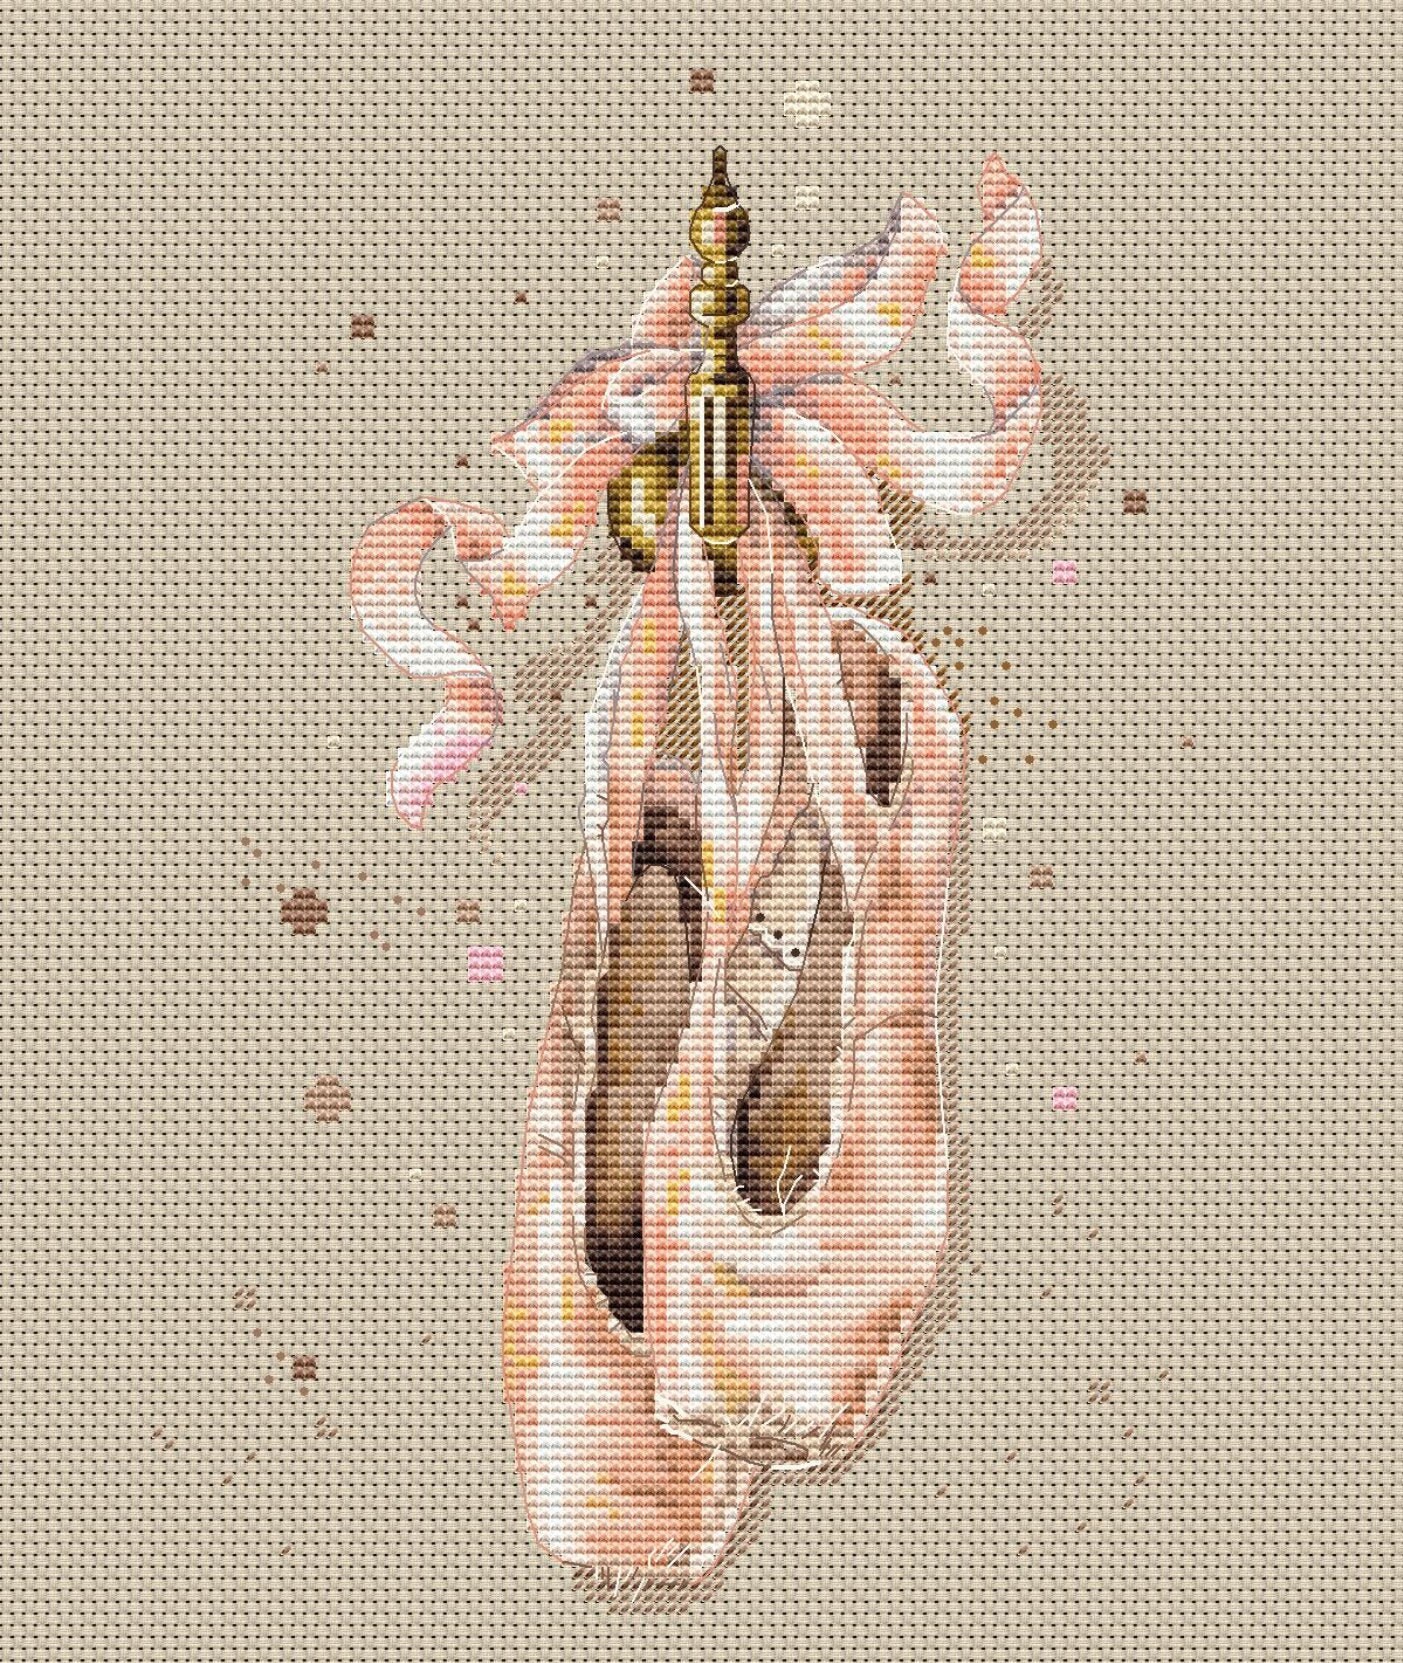 Ballet shoes Cross stitch pattern PDF for instant download | Etsy